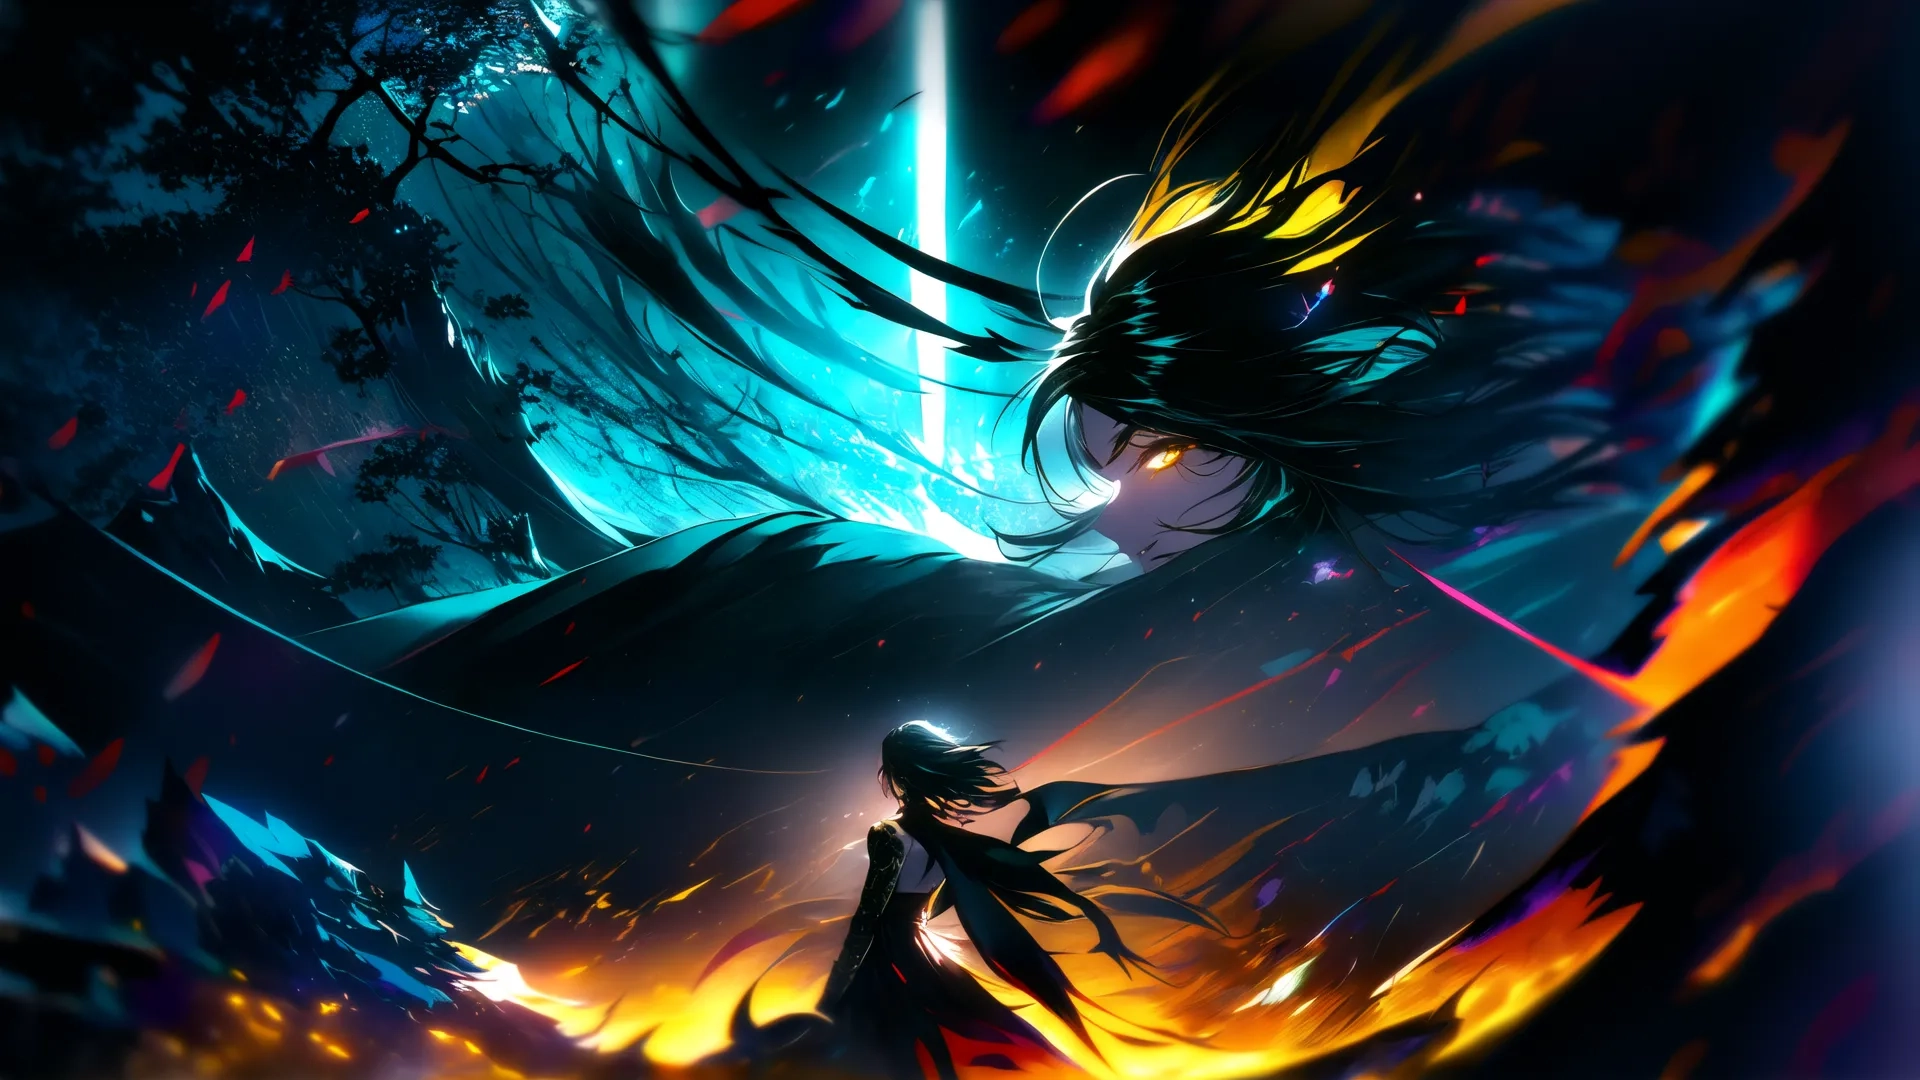 the anime character is staring at a light saber in the space, with bright flames swirling around her as an arc comes from behind him and falls down
